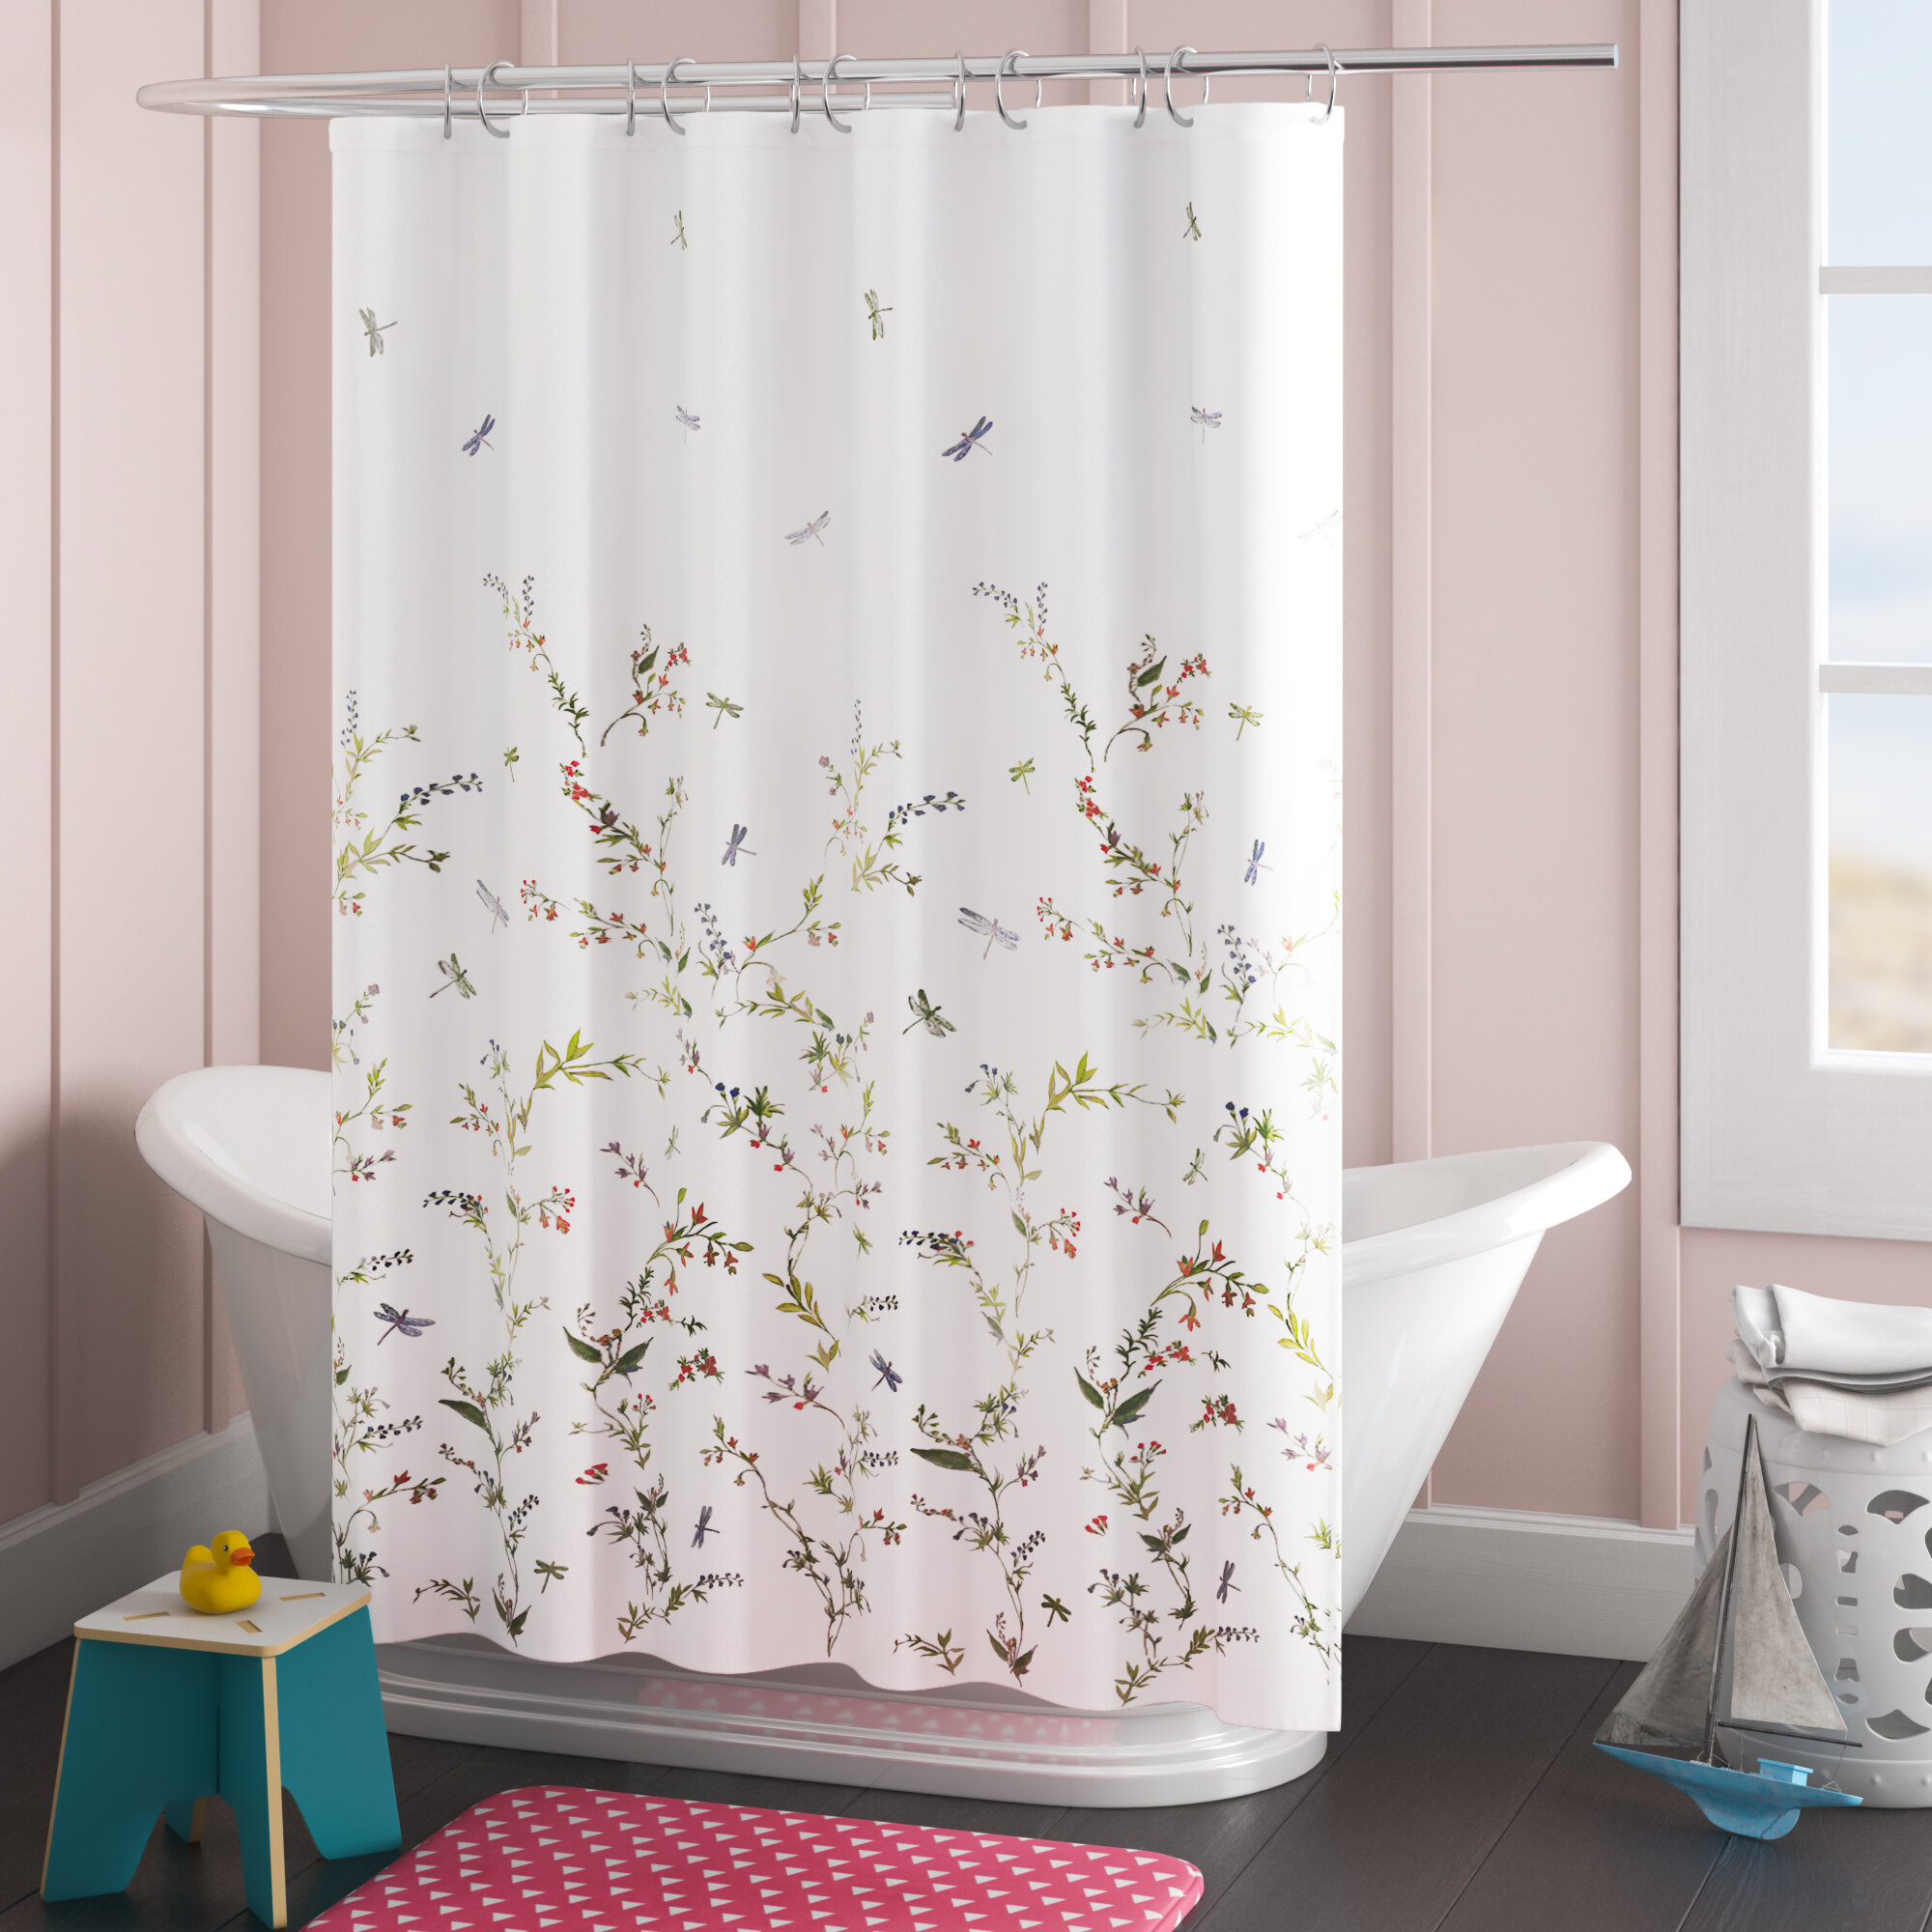 Watercolor Dragonfly On White Bathroom Fabric Shower Curtain With Hooks 71Inches 